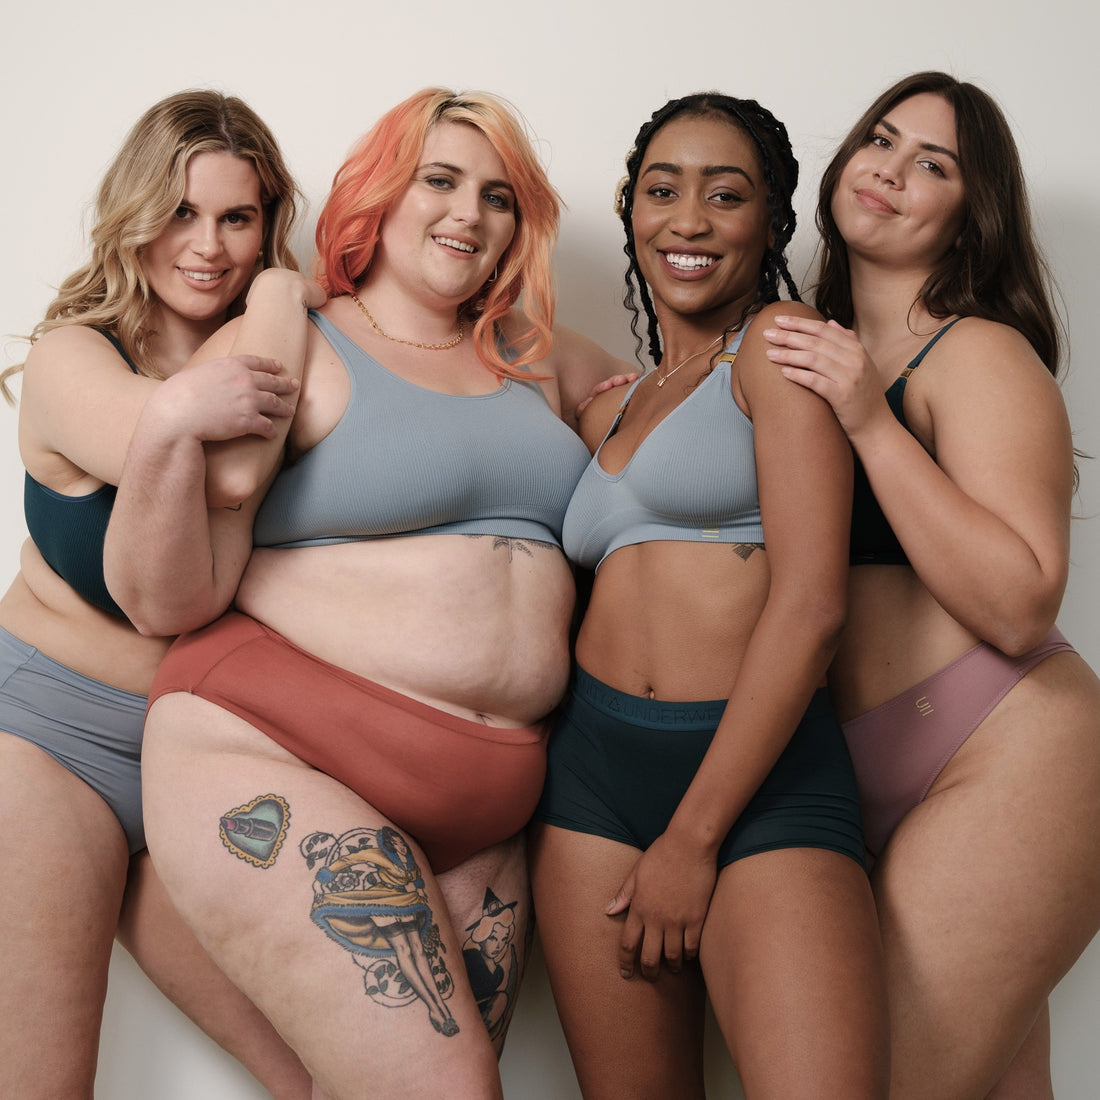 Bras & Crops for Change-Makers - Underwear for Humanity